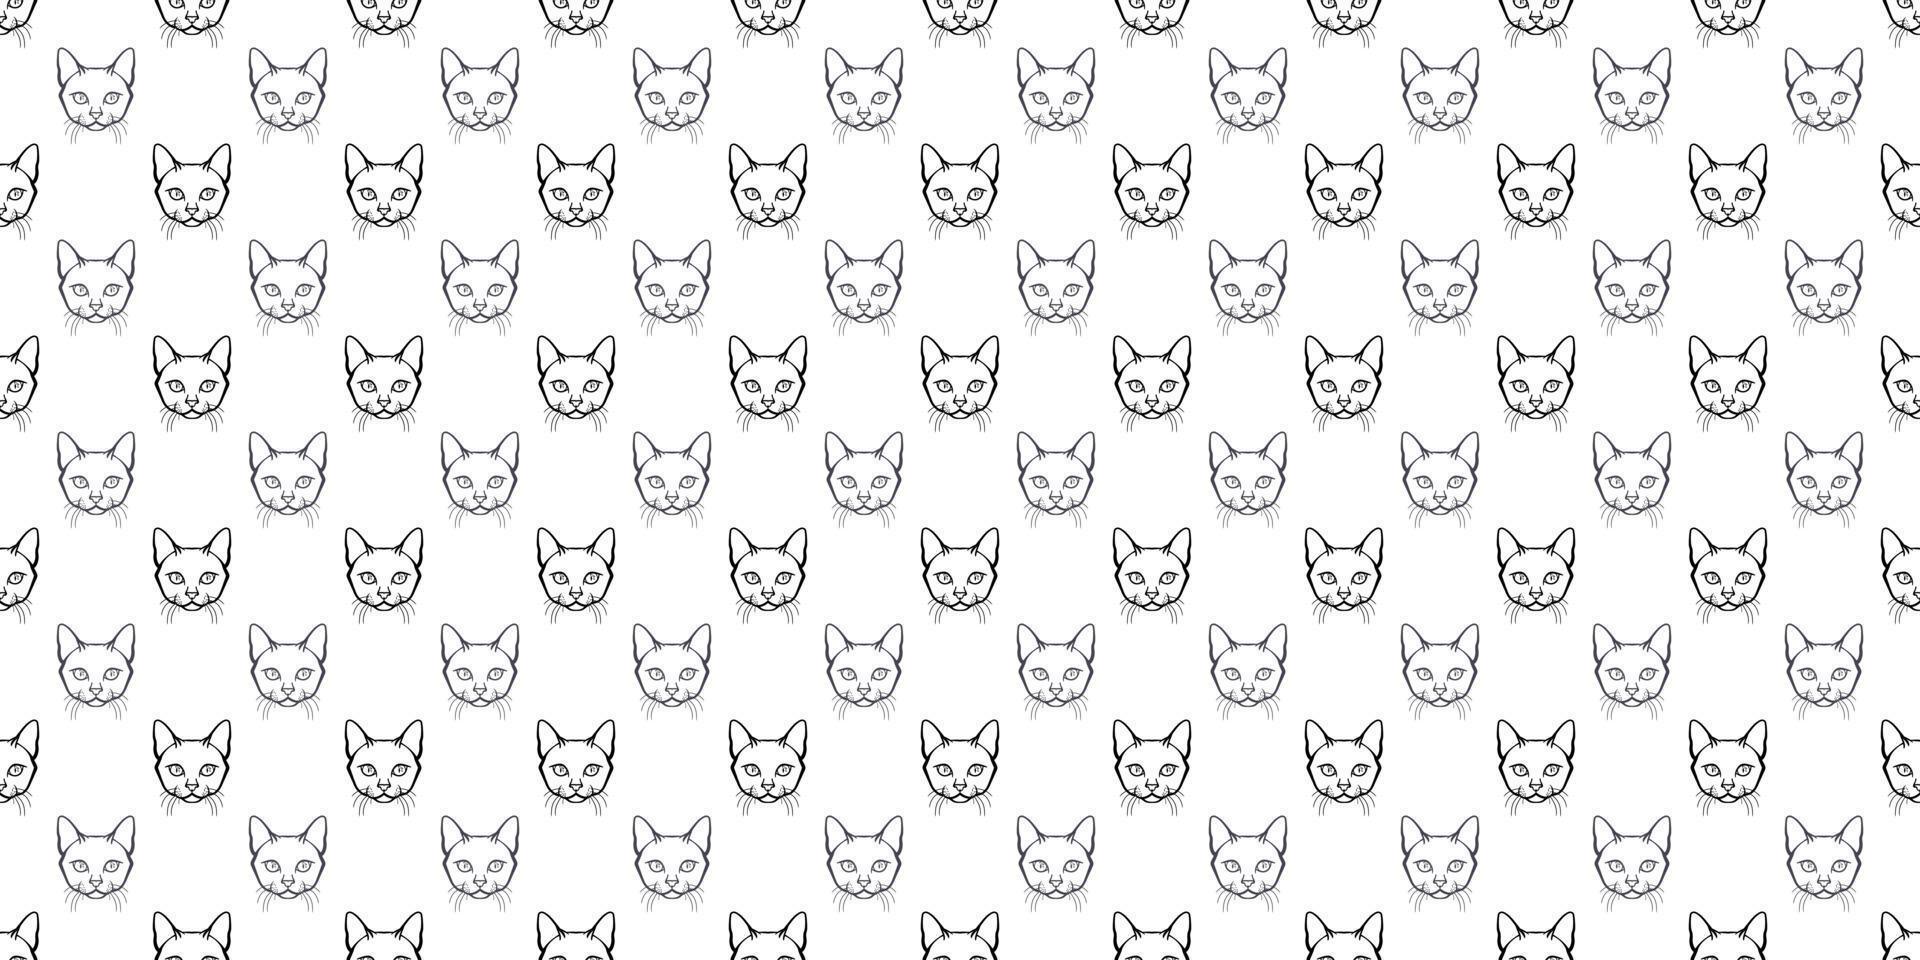 Black and white cat seamless repeat pattern vector background